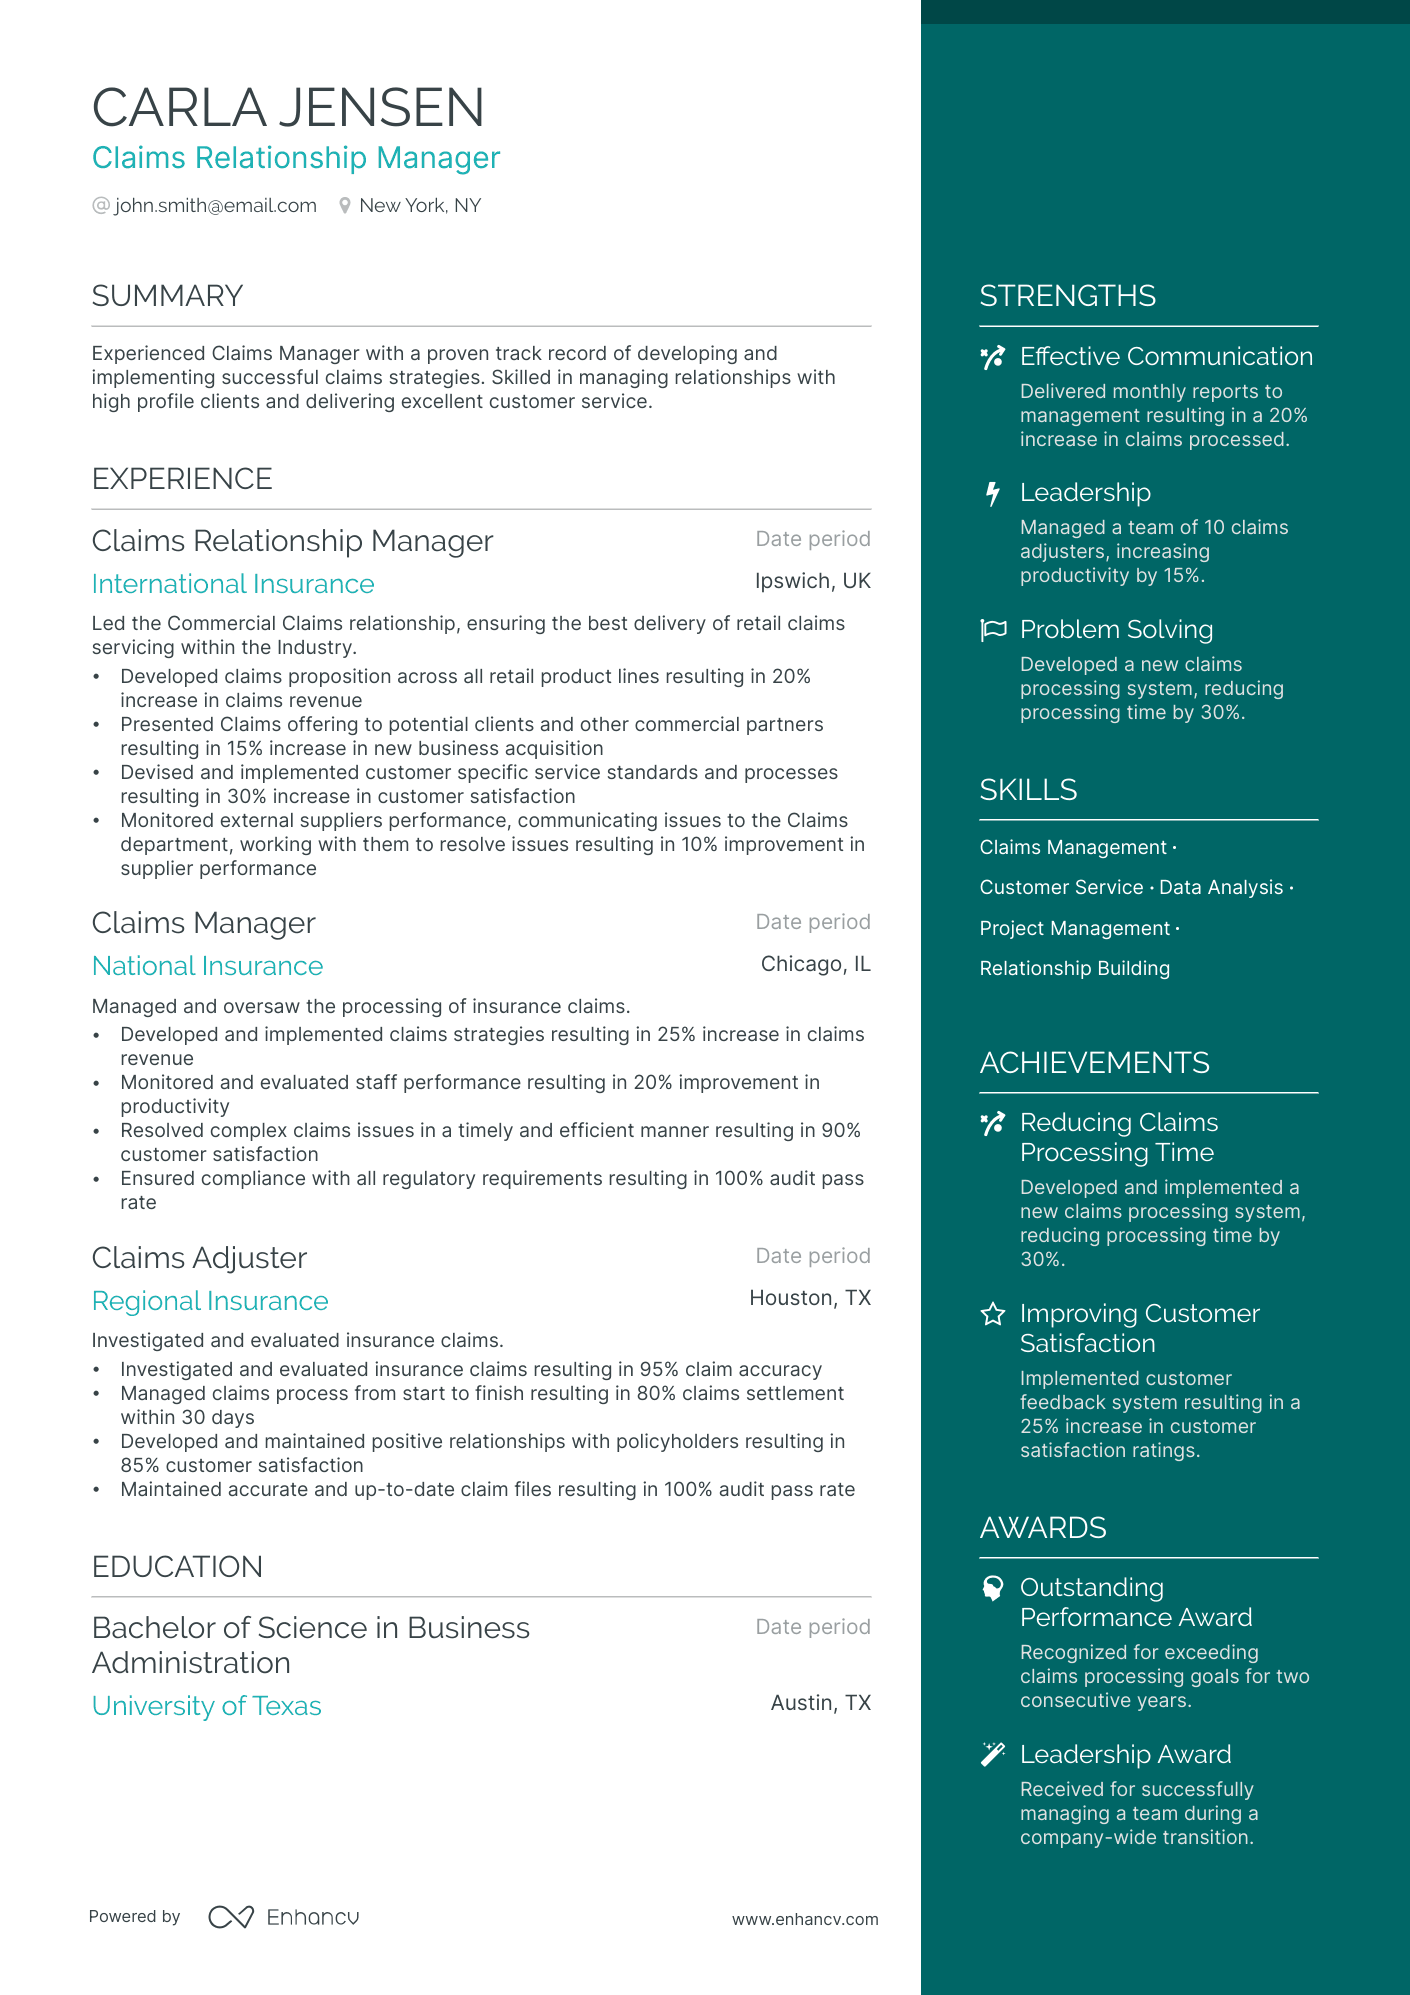 Claims Manager resume example